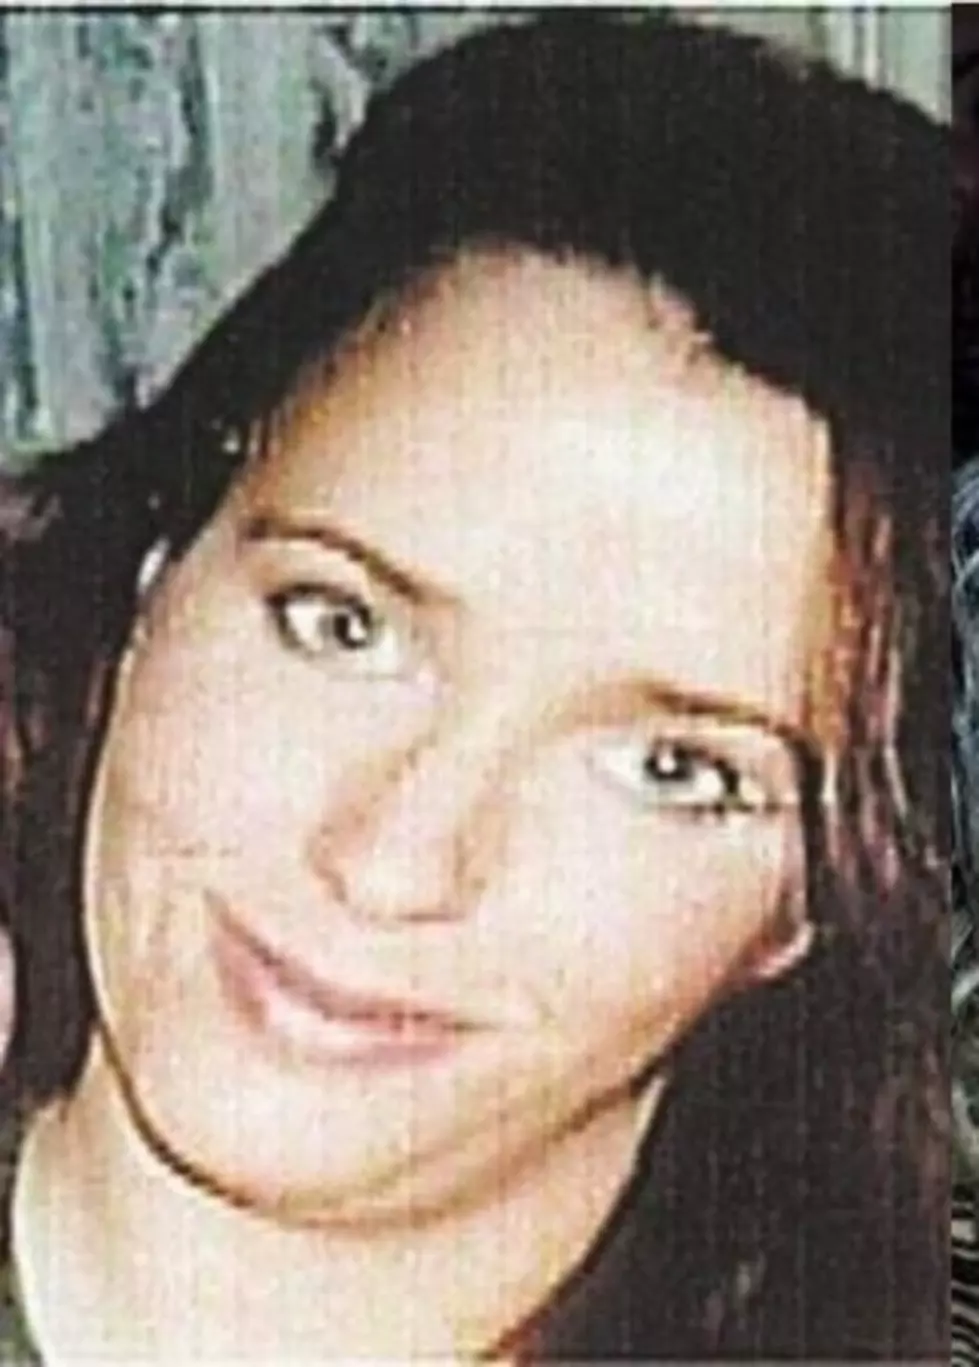 Court Documents Filed Show Details About the Murders of Lisa Pate and Mickey Shunick